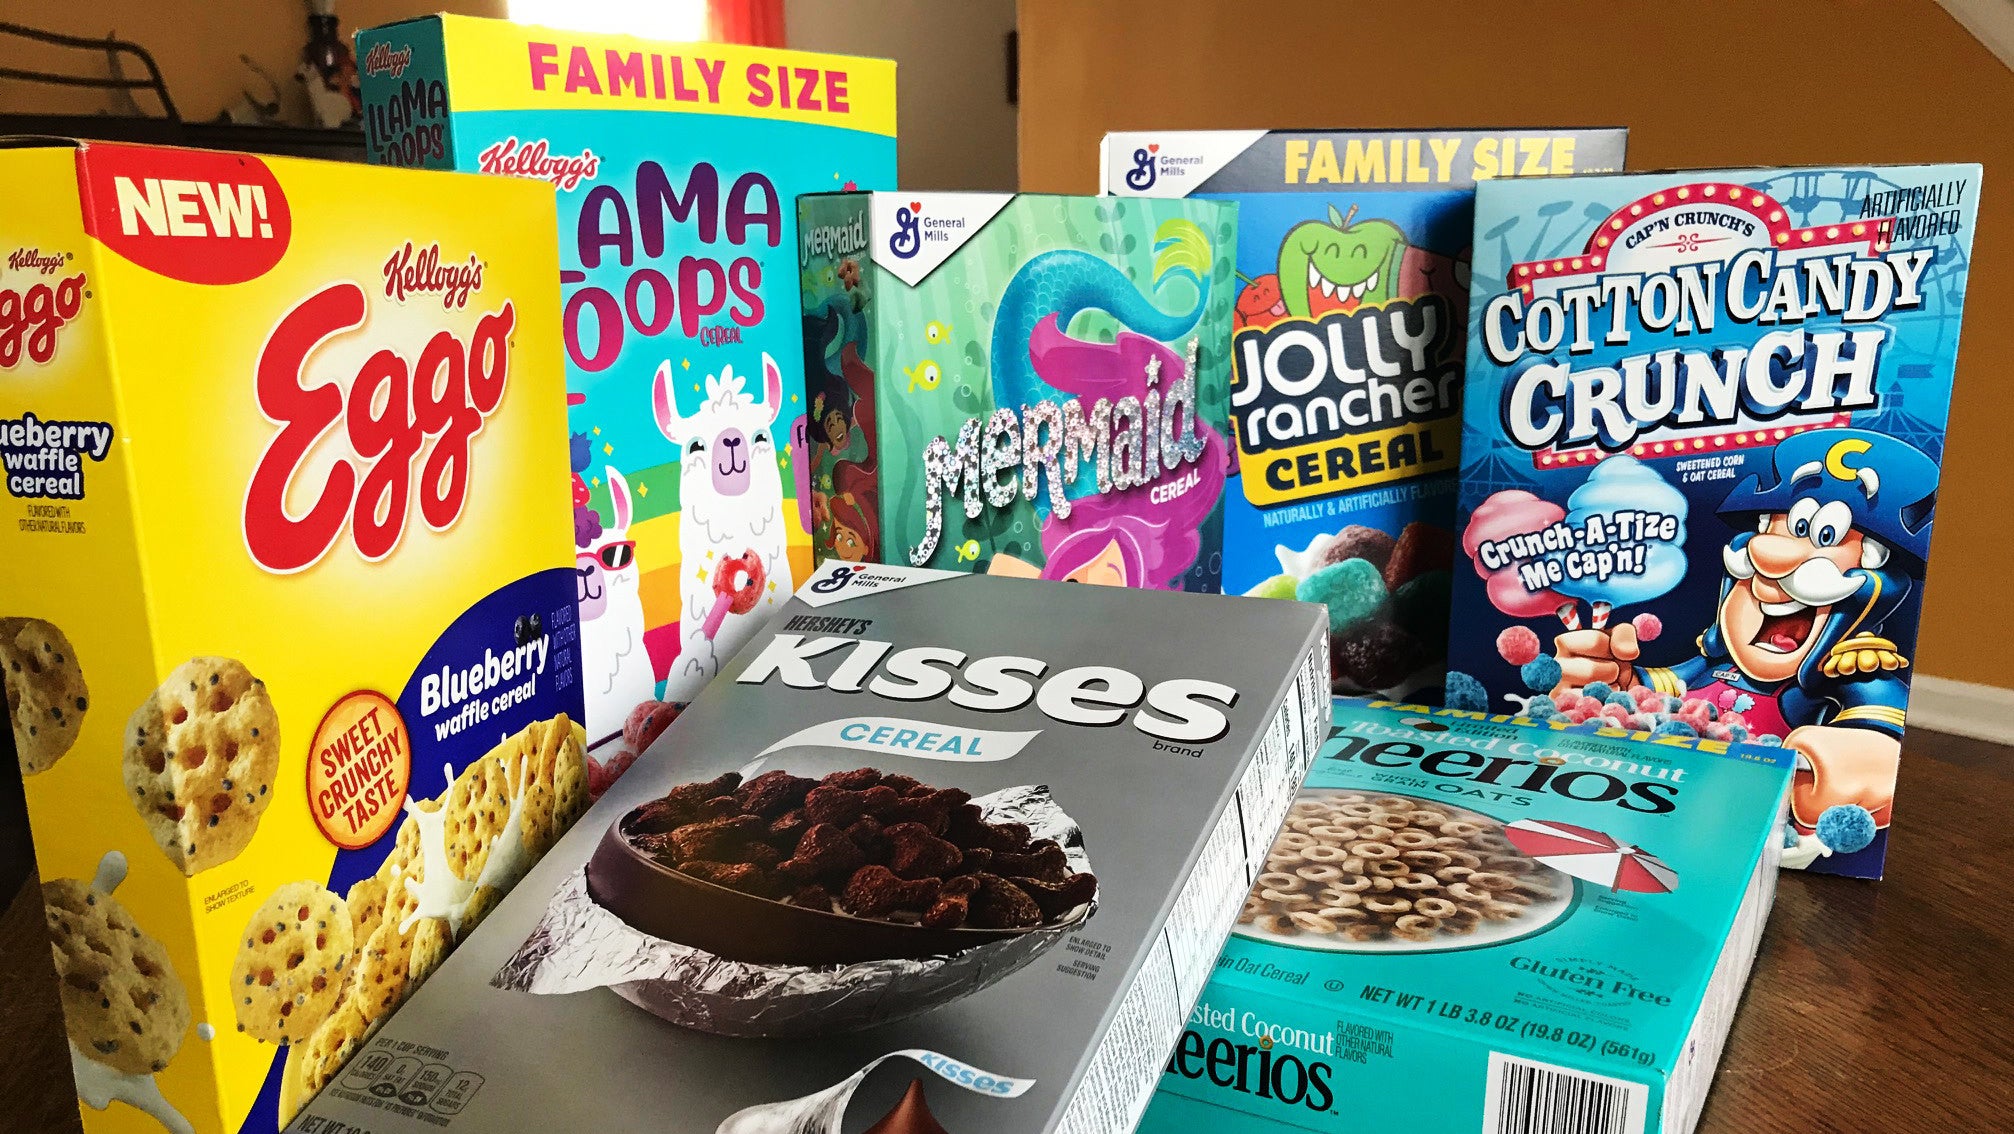 I Tried More Weird Cereals So You Don’t Have To